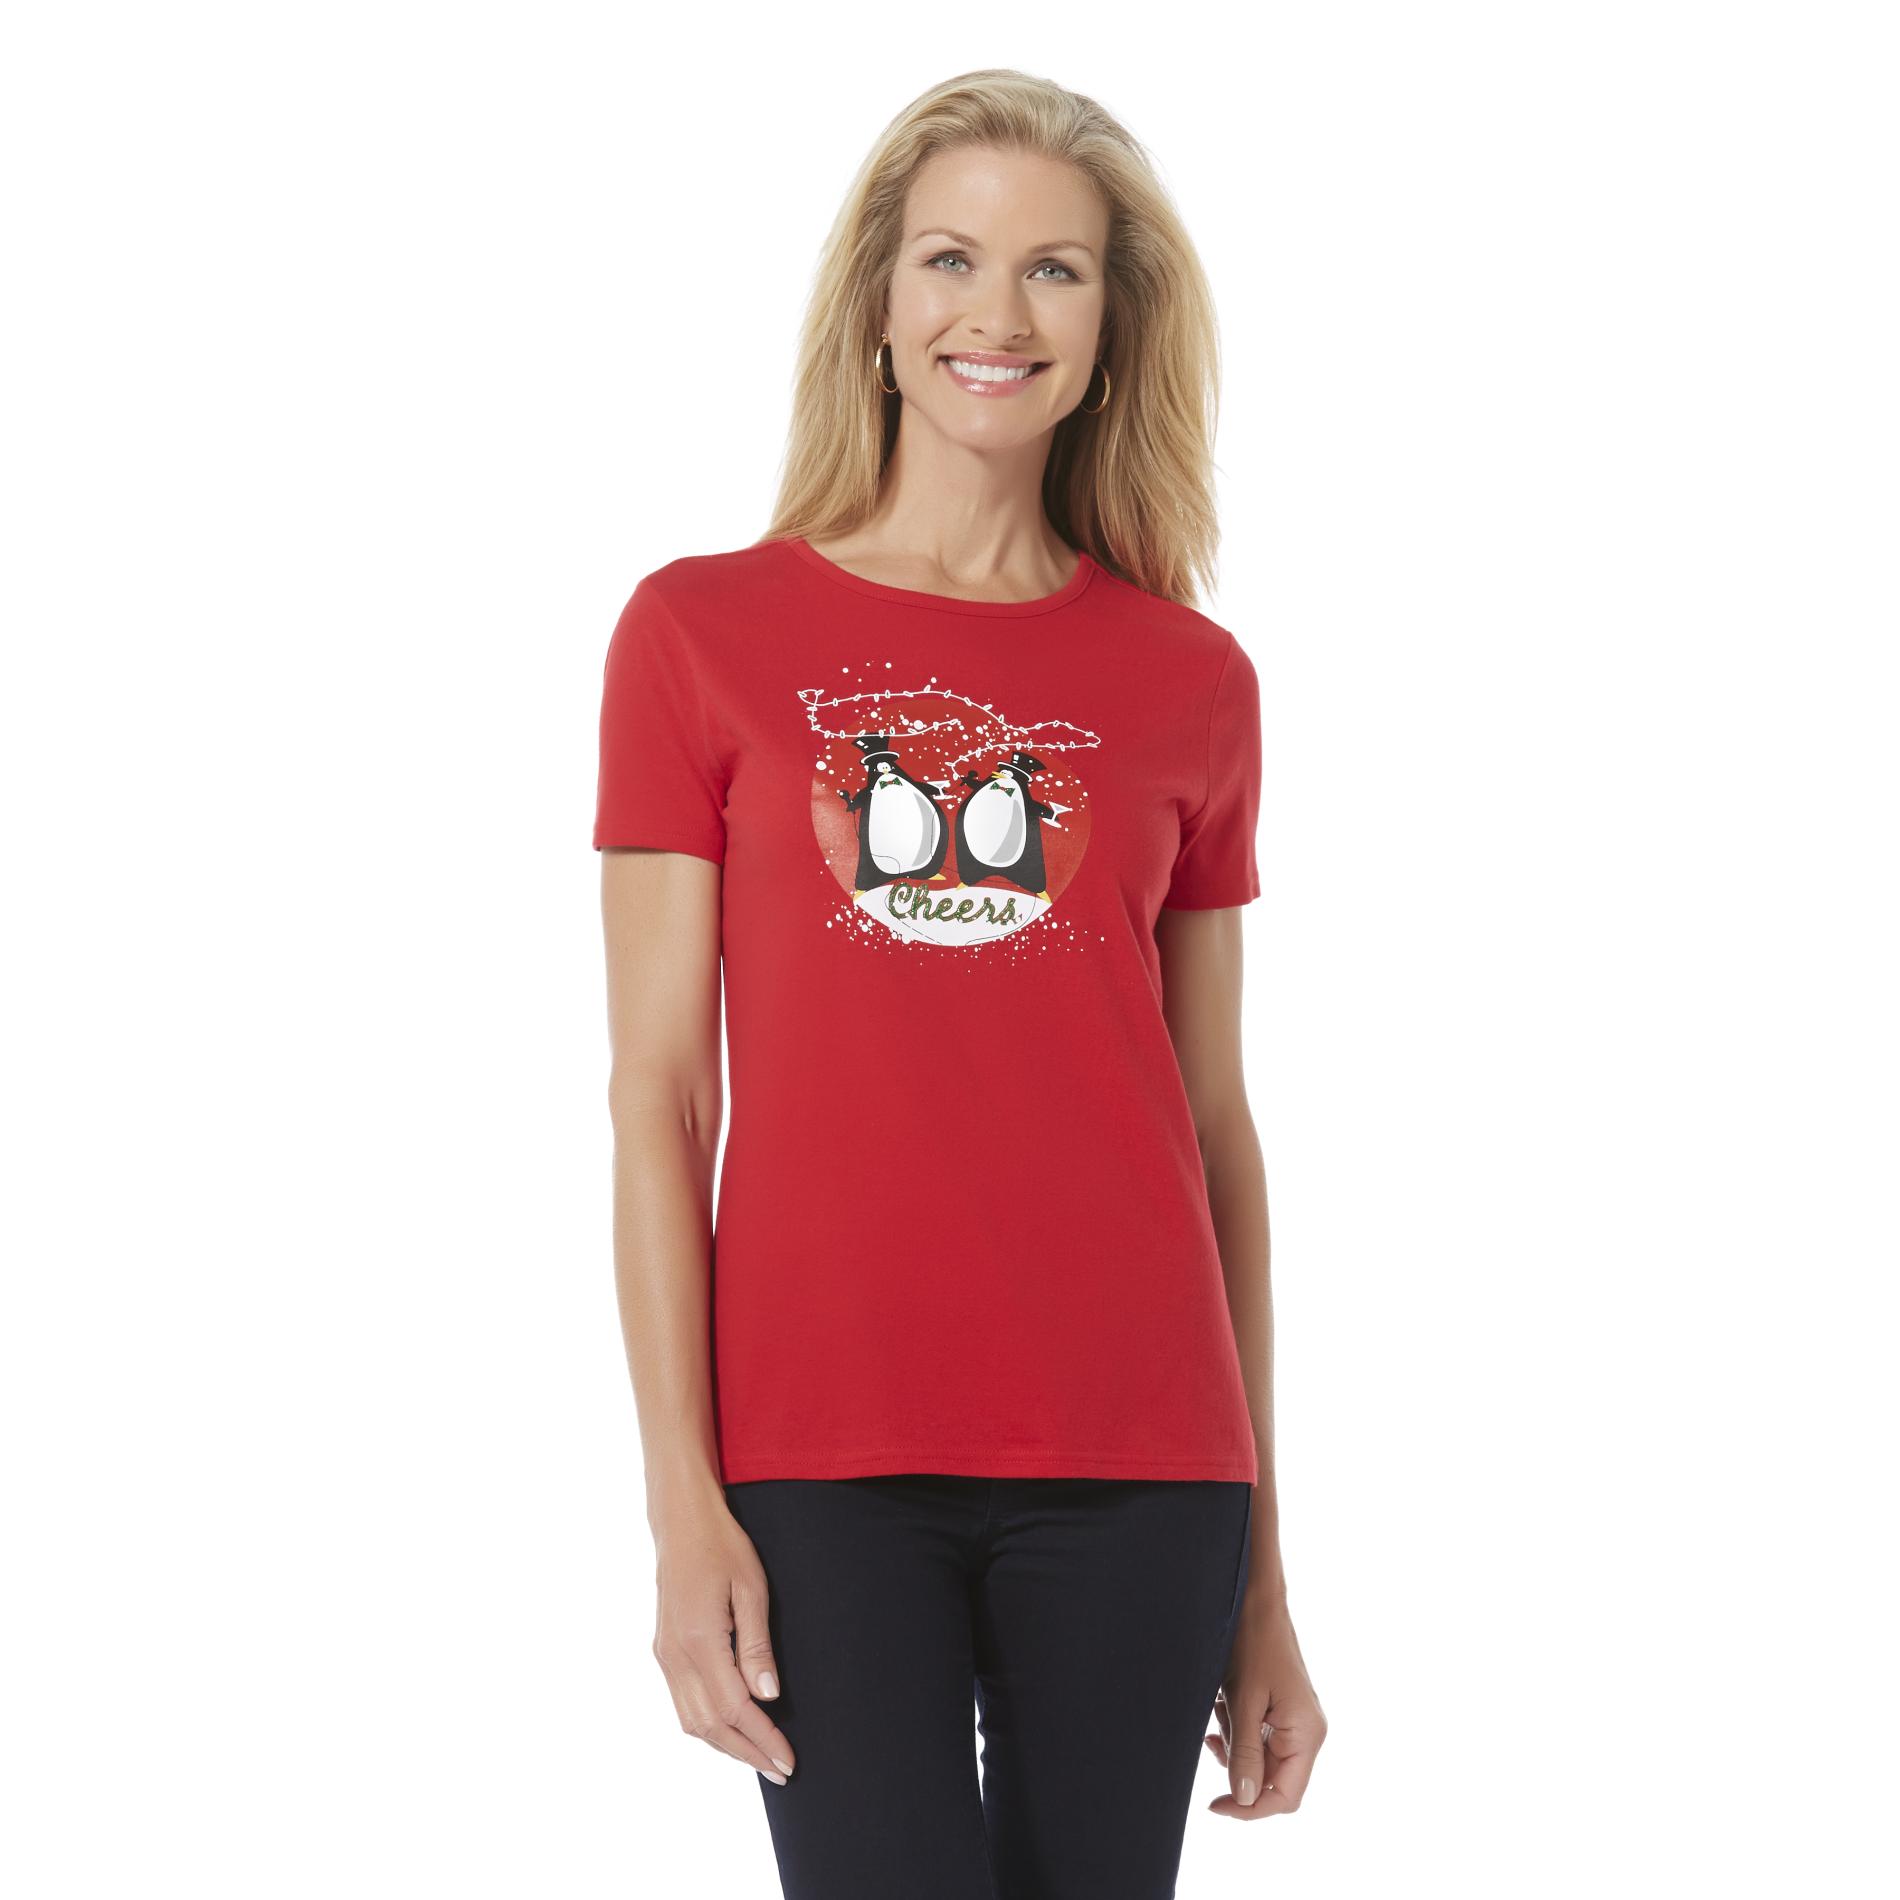 Holiday Editions Women's Christmas Graphic T-Shirt - Penguins